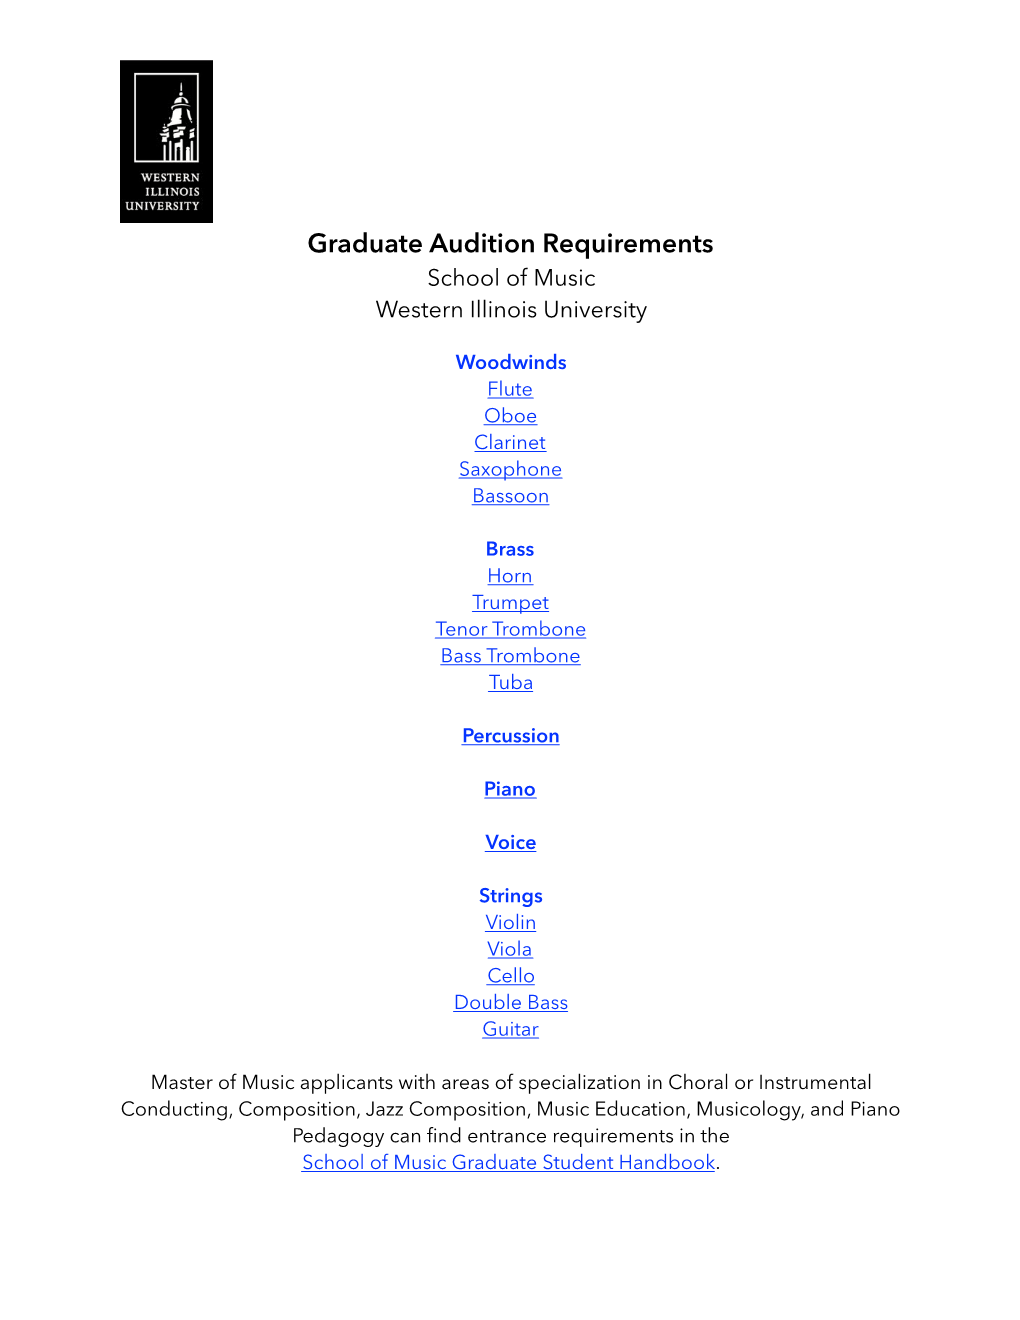 MM and PBC Audition Requirements